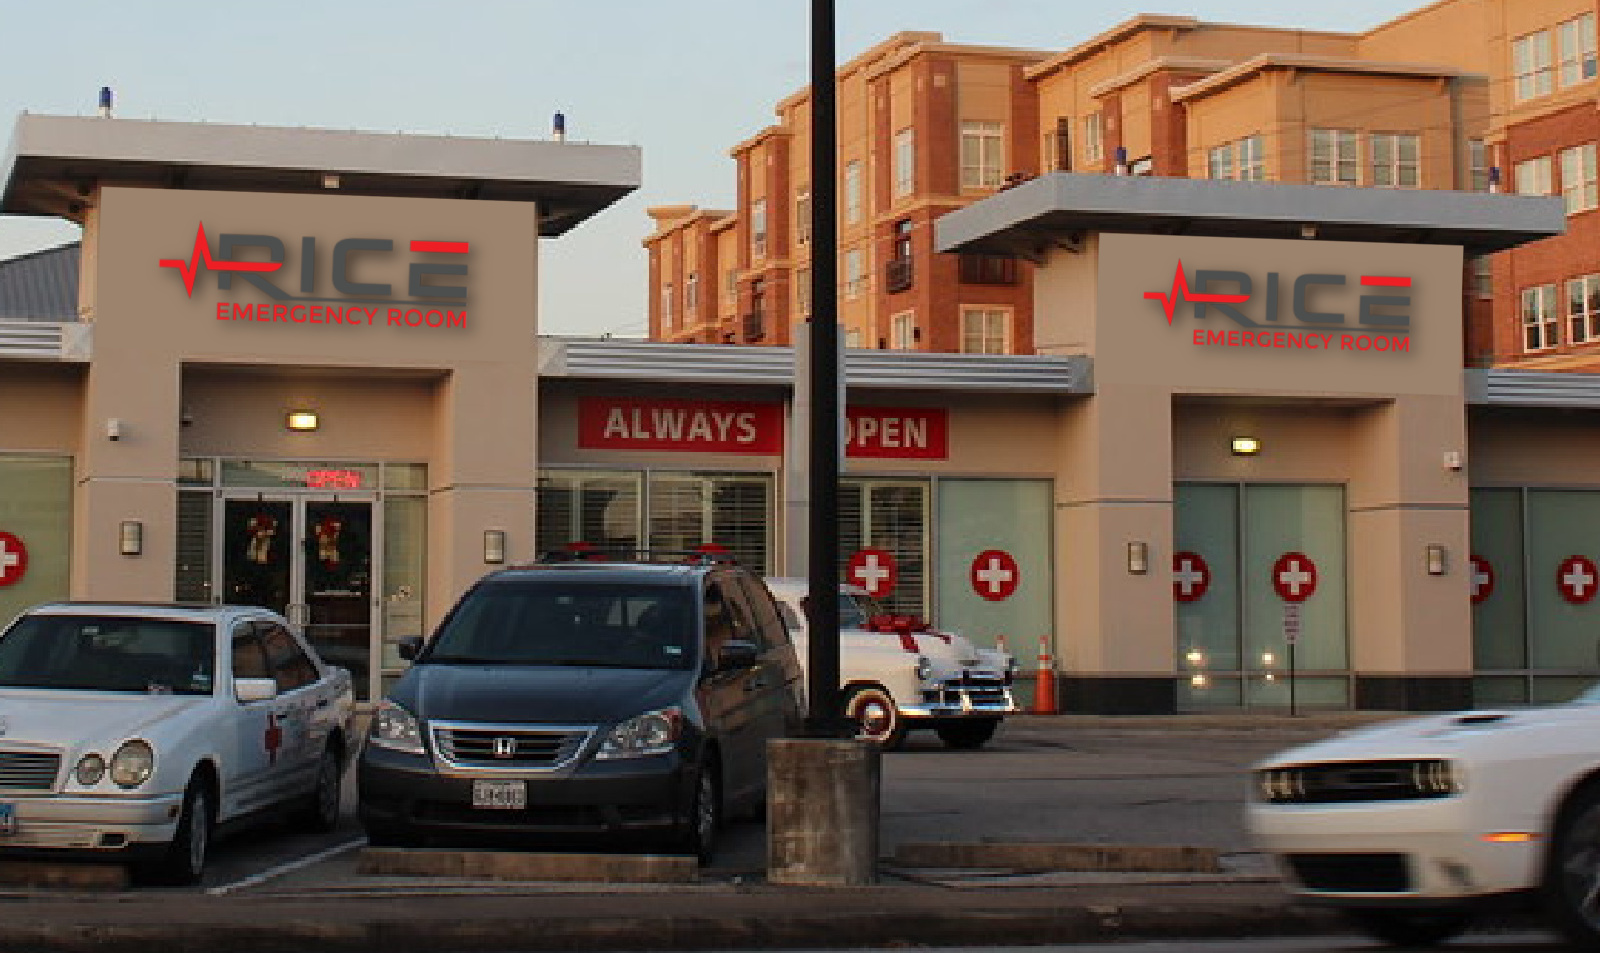 Specialized Medical Care with Rice Emergency Room Equates to Better Community Care